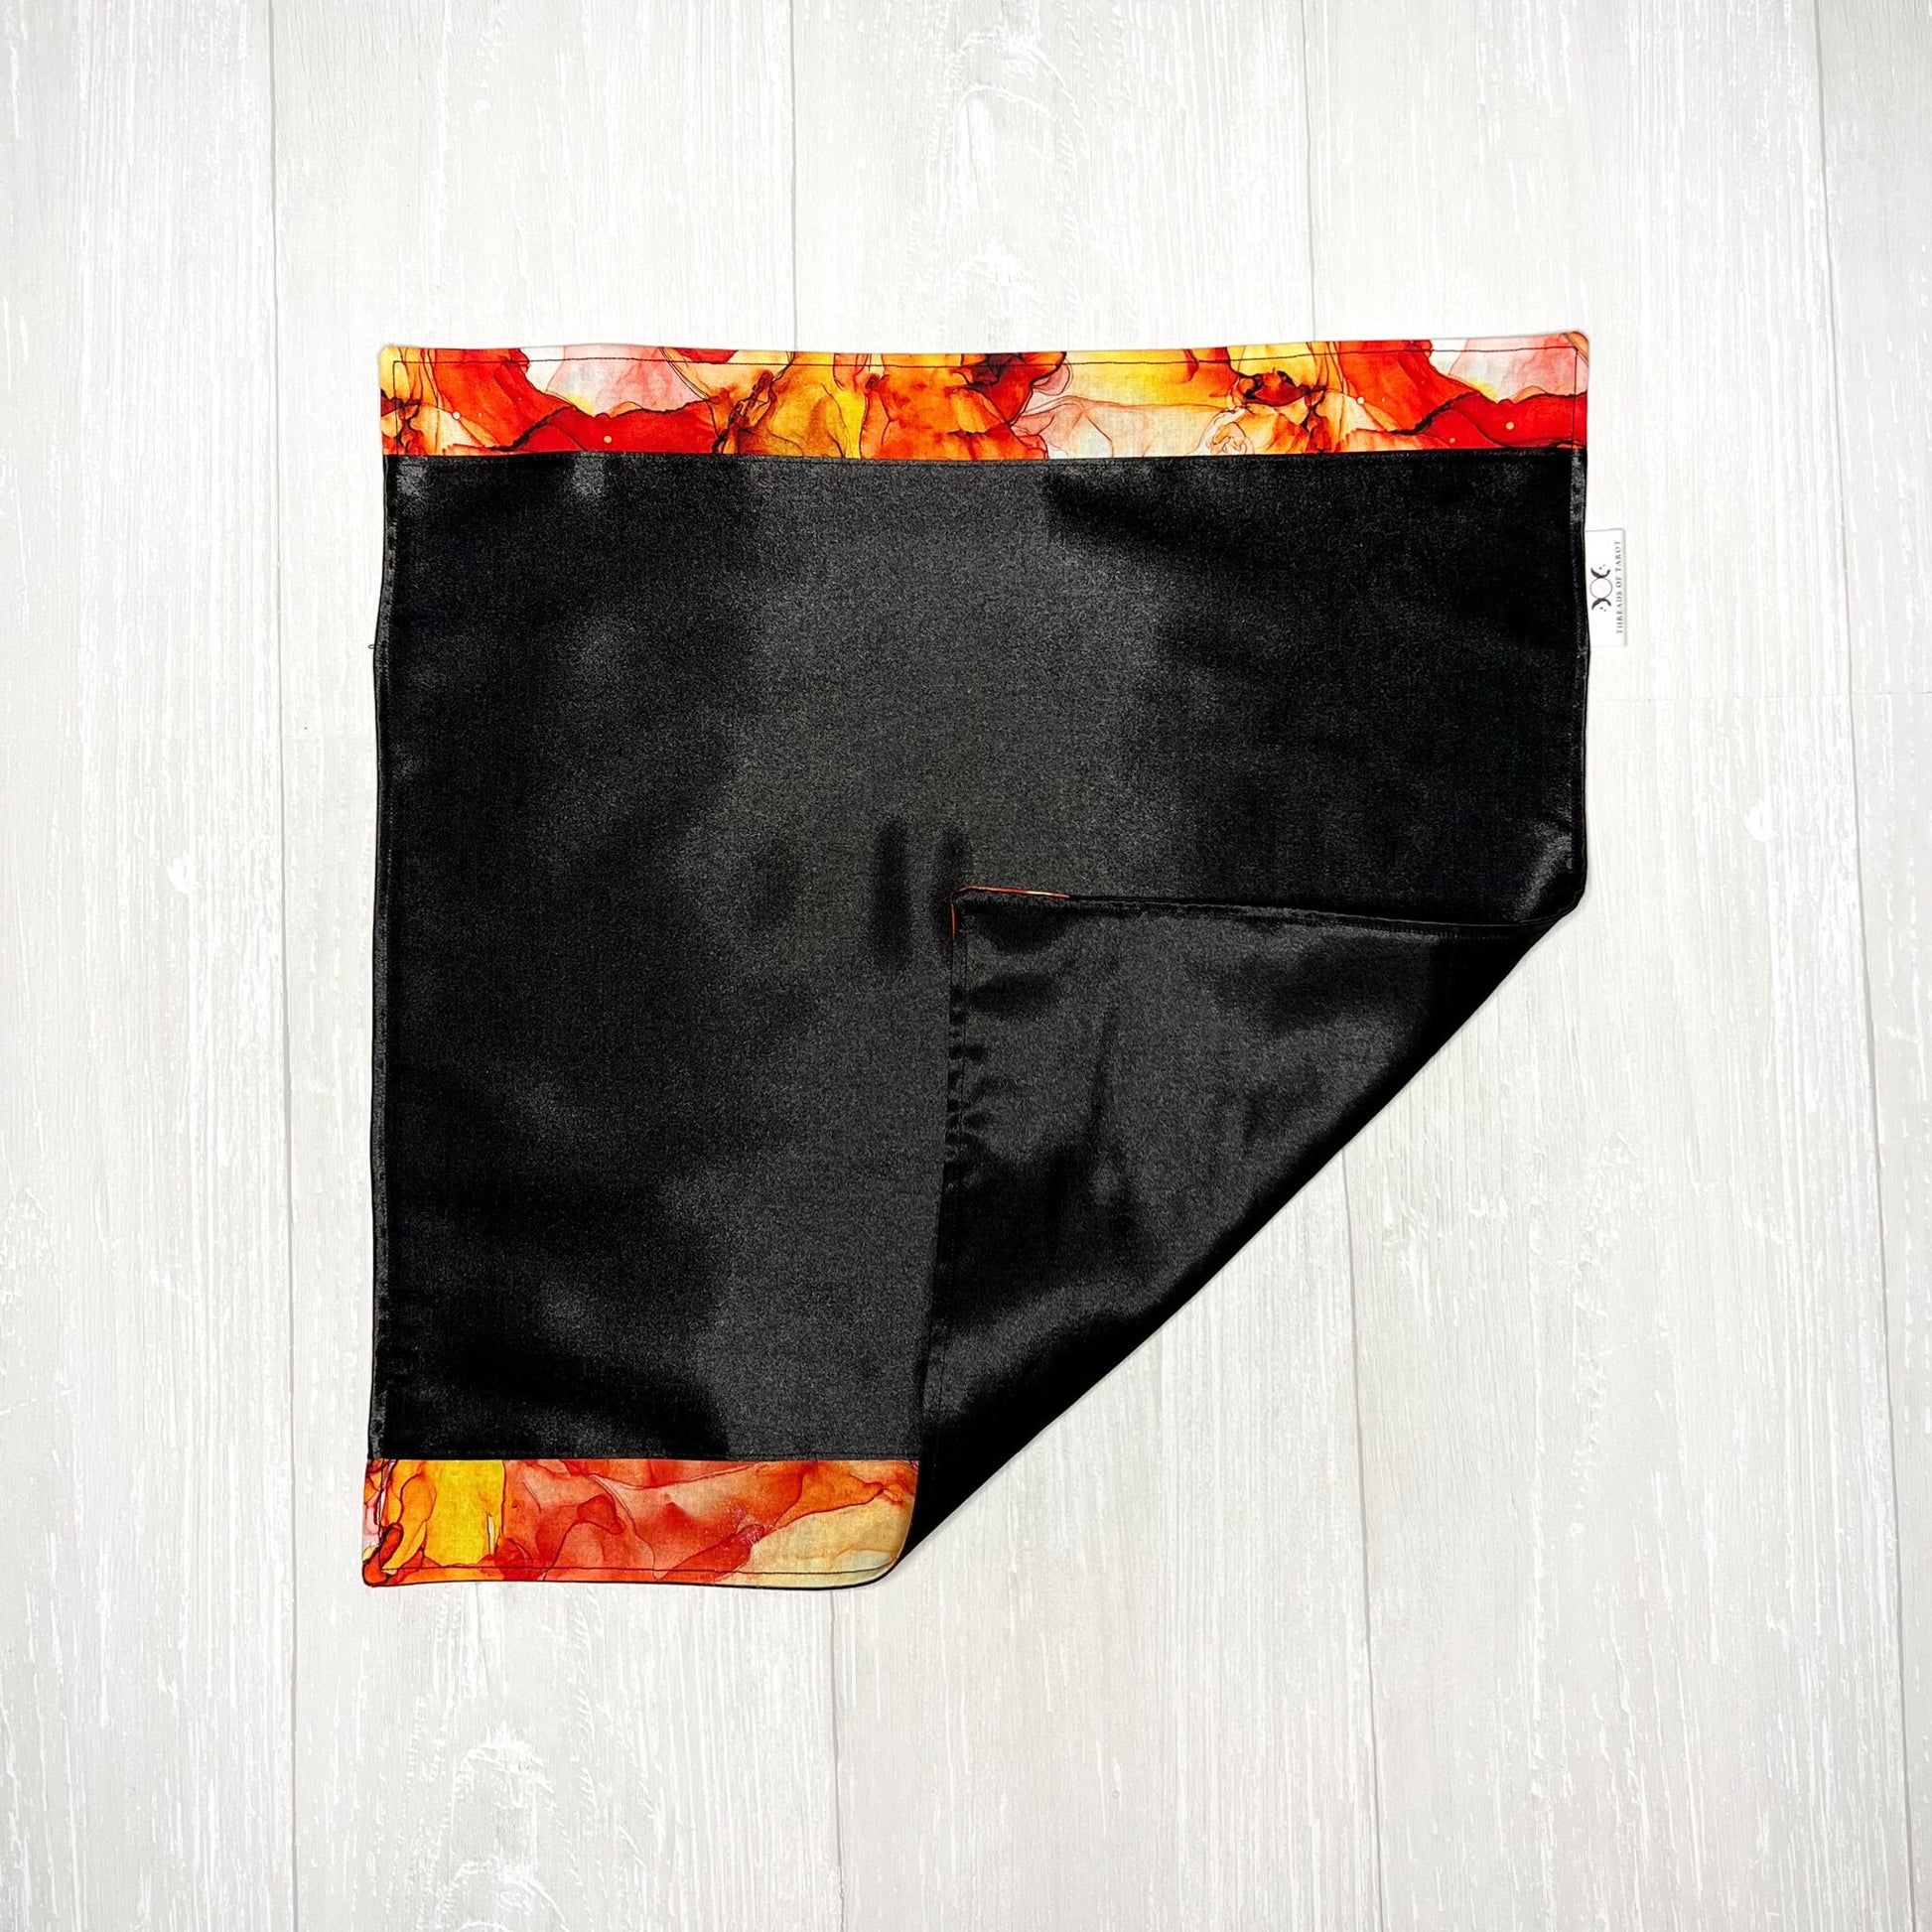 Black Altar Cloth with Fiery Border Detail, Ritual Cloth, Rune Casting, Tarot Reading Cloth, Witchy Gift Supplies, Divination Tools